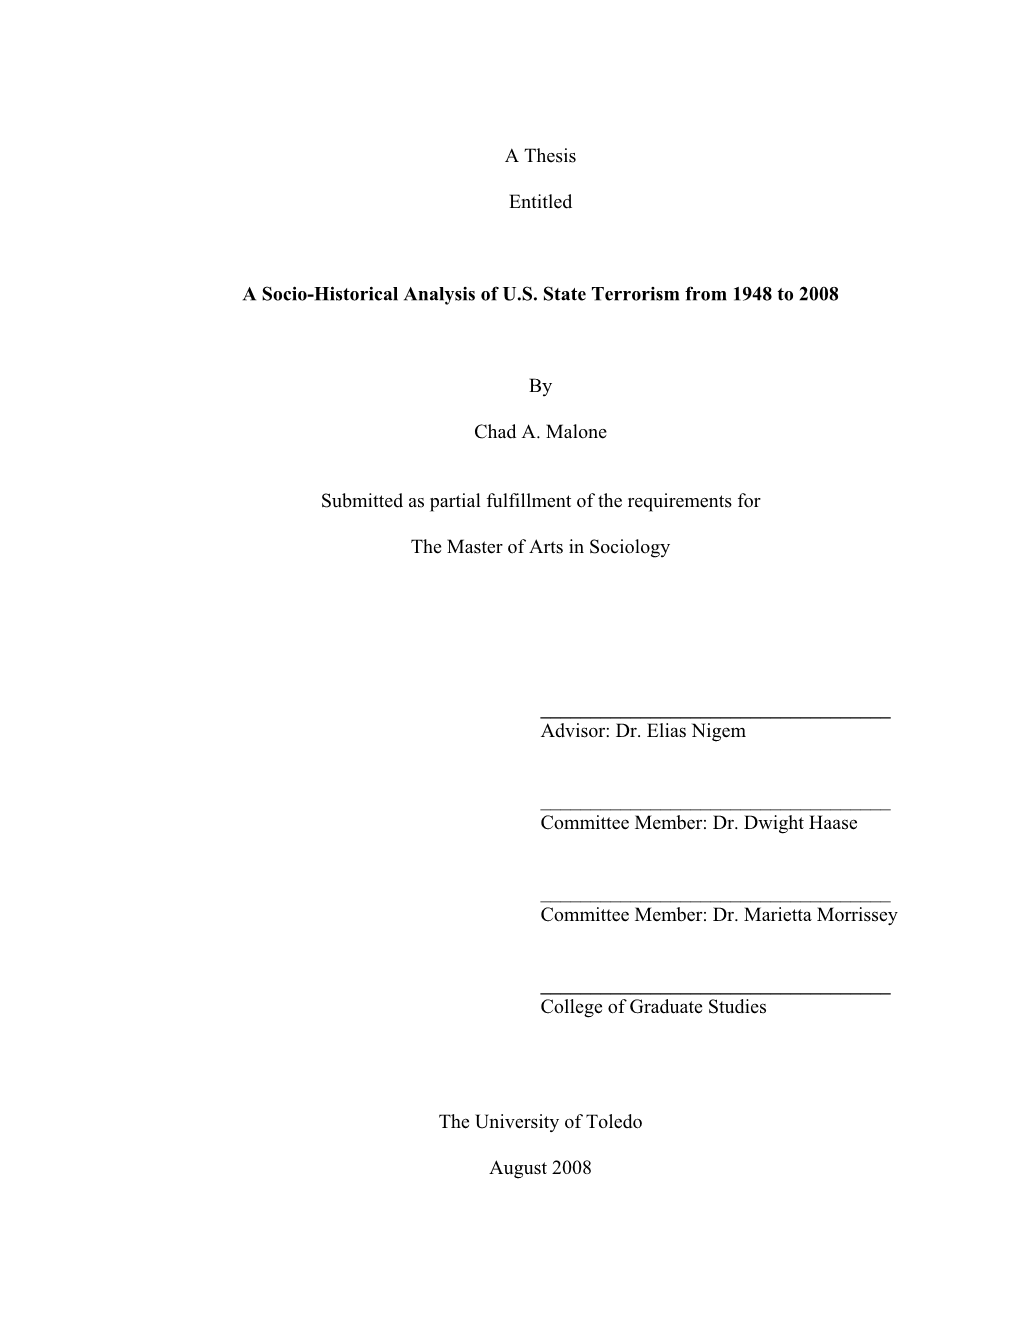 A Thesis Entitled a Socio-Historical Analysis of U.S. State Terrorism